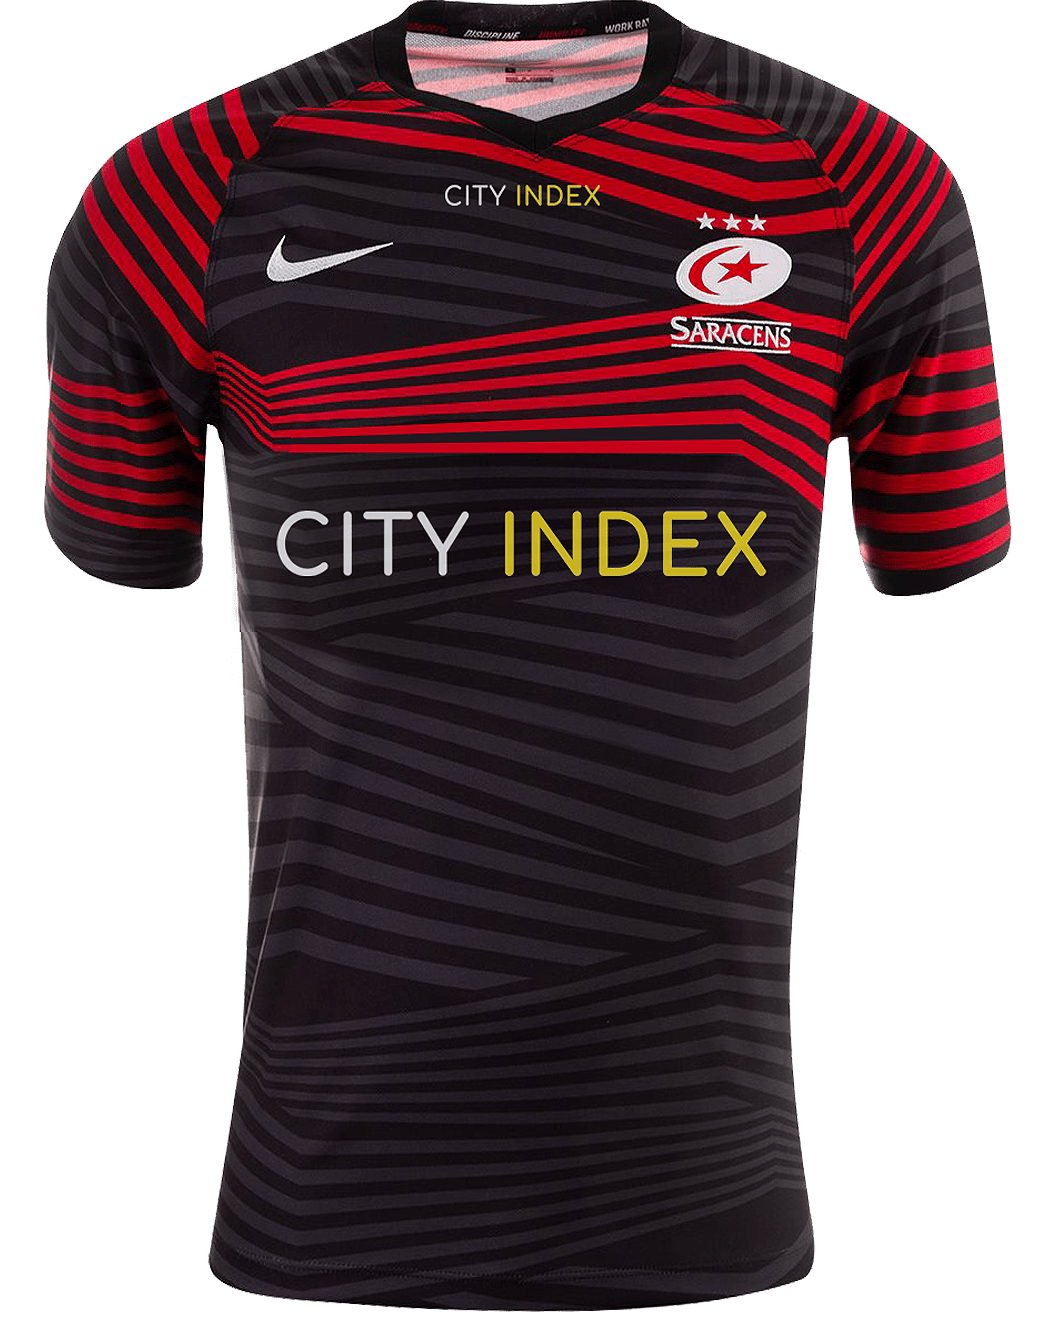 rugby-shirt-1